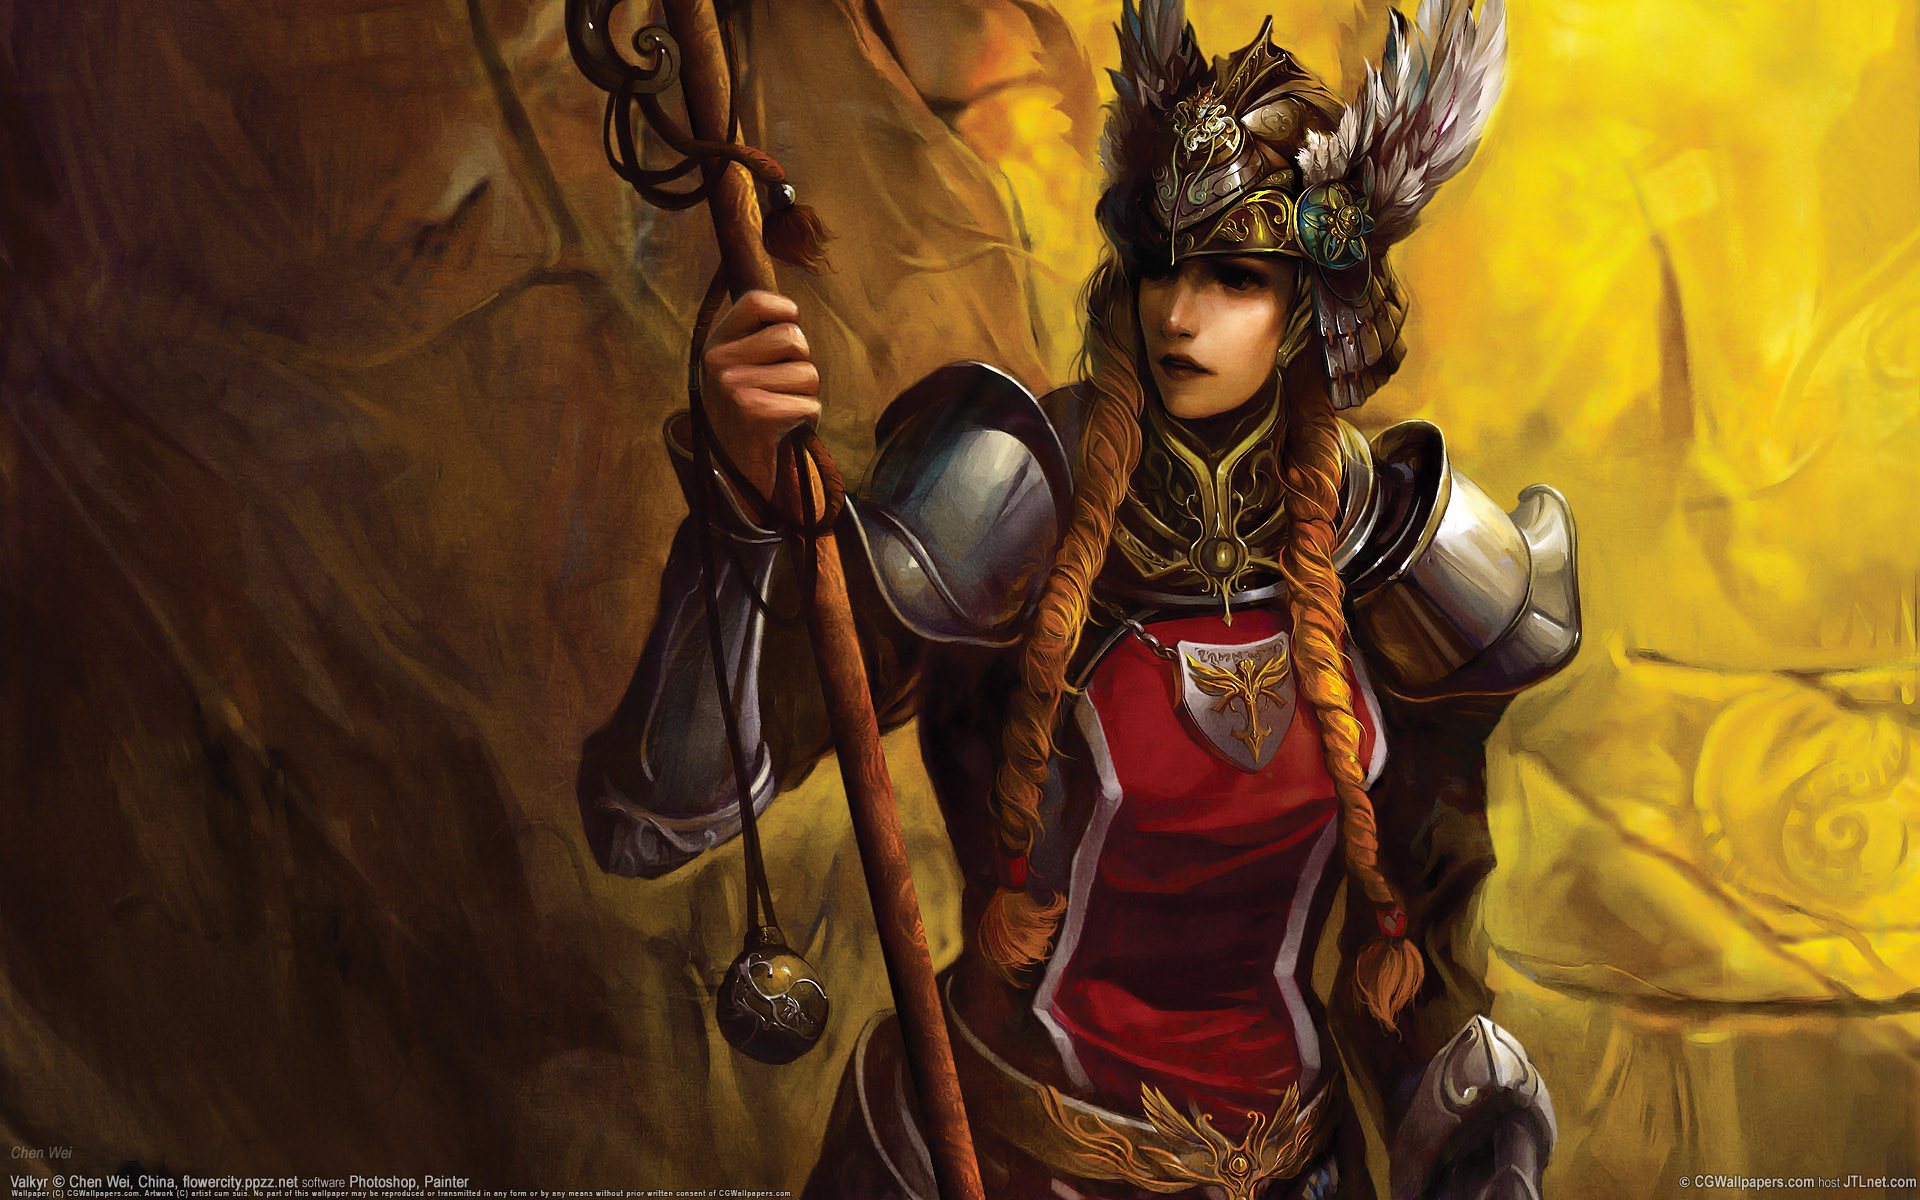 Download Wallpaper For 2560x1600 Resolution Warrior Armor Hd